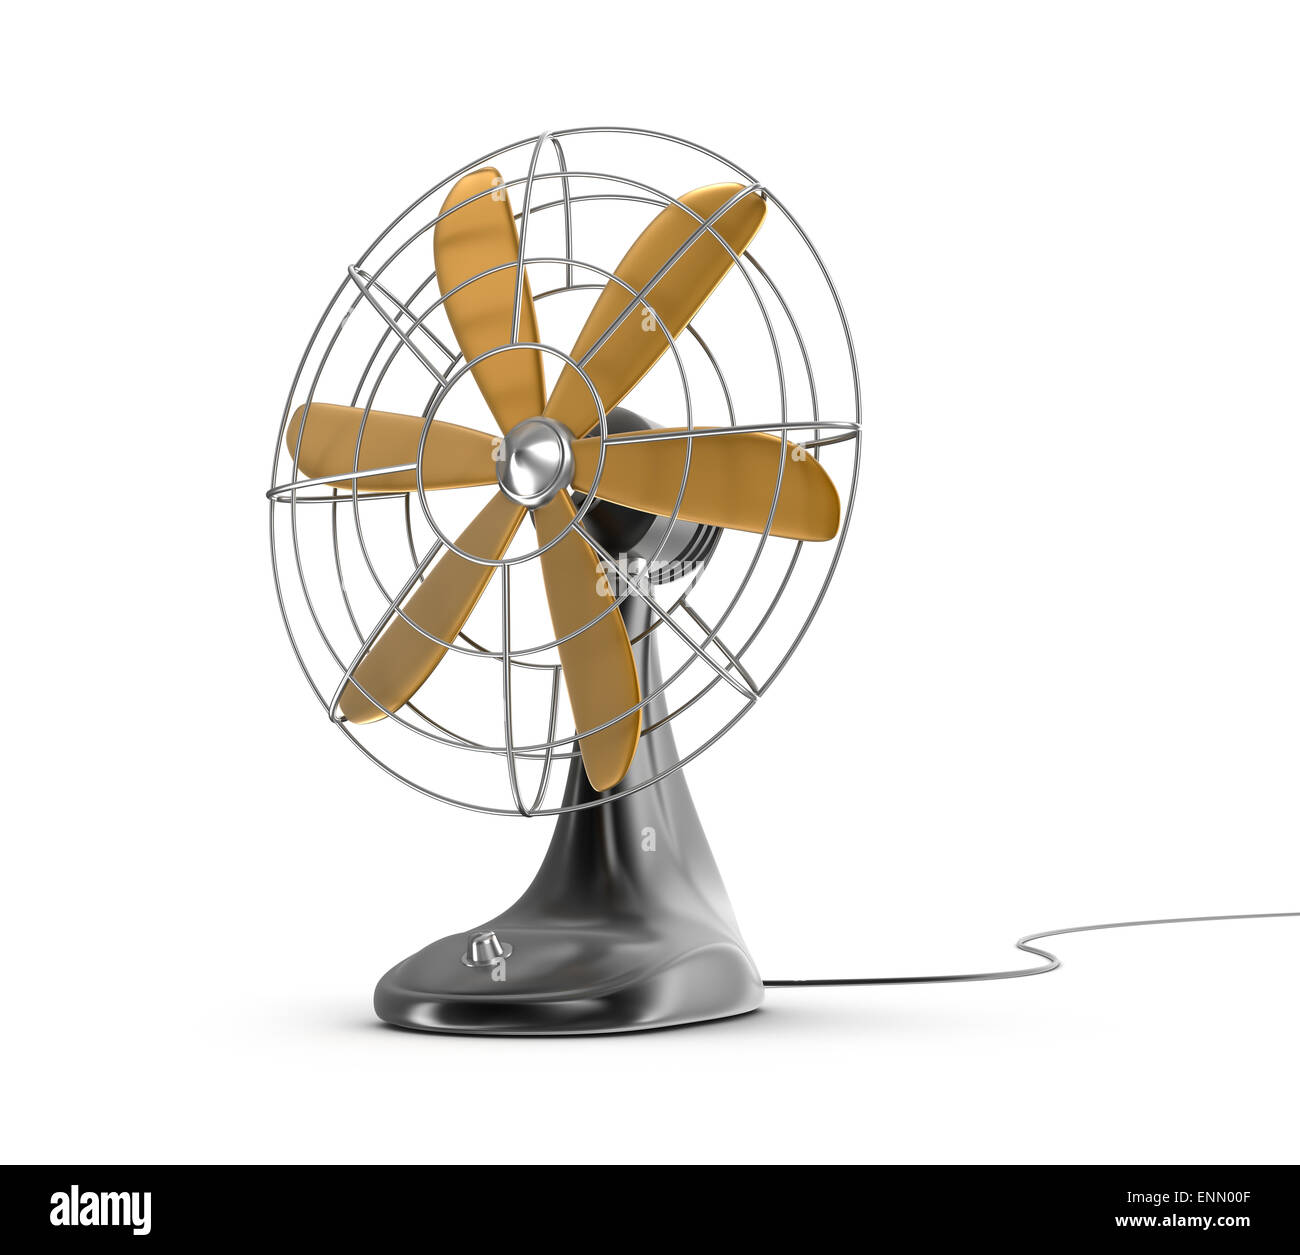 Old style electric fan Stock Photo